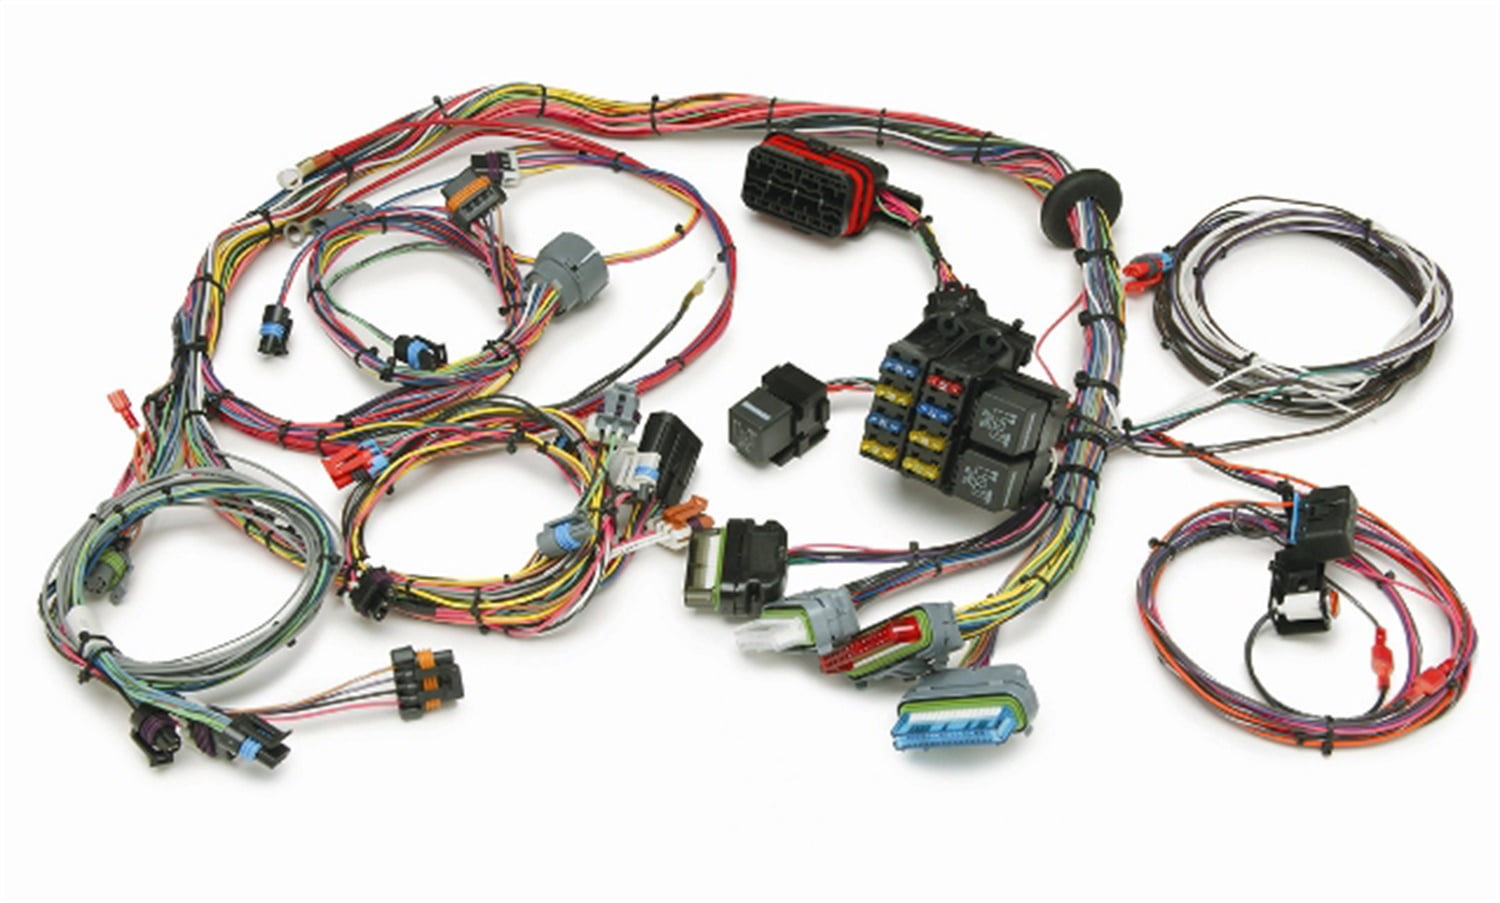 Painless Wiring 60211 Engine Wiring Harness Fits select: 1996-2000  CHEVROLET GMT-400, 1996-2000 GMC SIERRA 